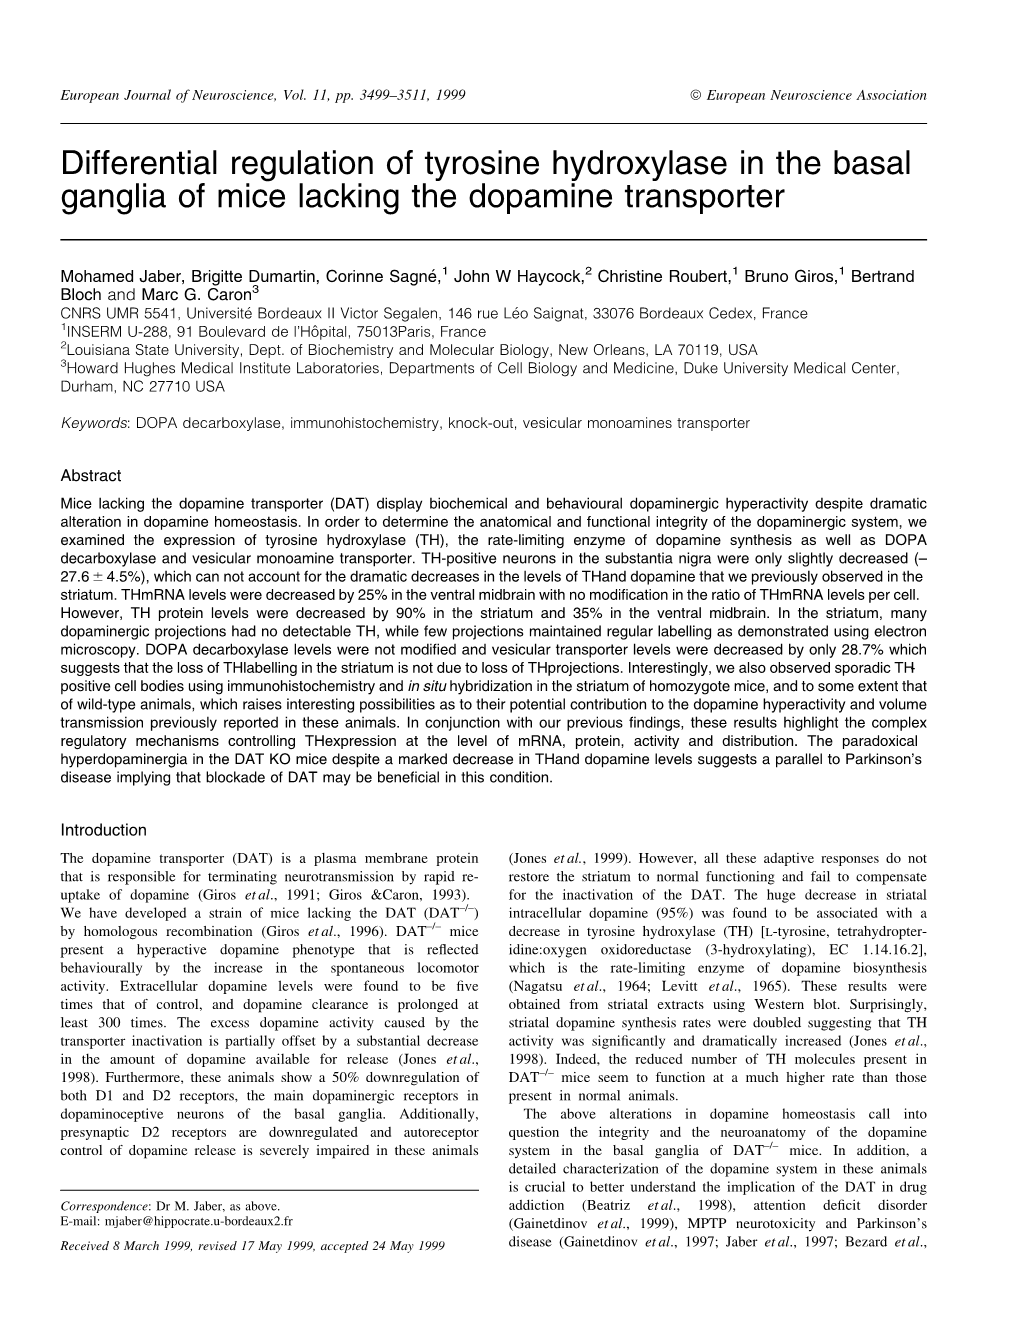 Differential Regulation of Tyrosine Hydroxylase in the Basal Ganglia of Mice Lacking the Dopamine Transporter